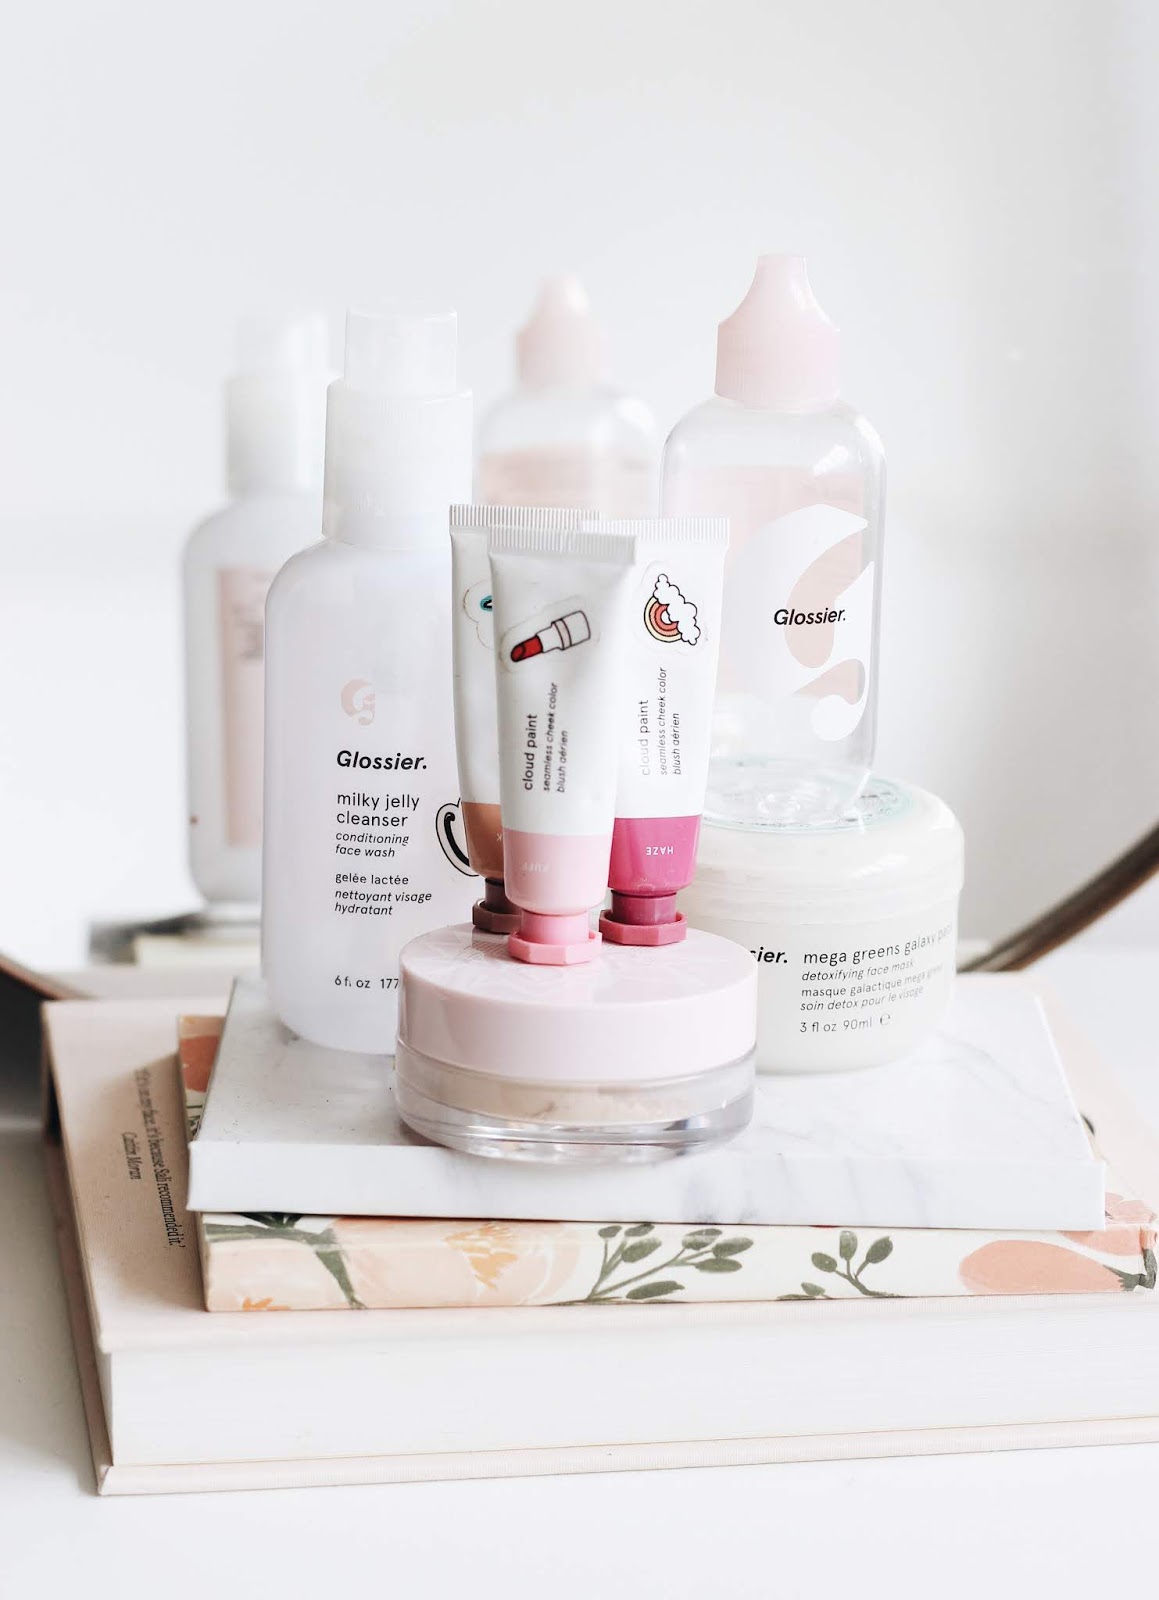 Glossier Beauty Recommendations